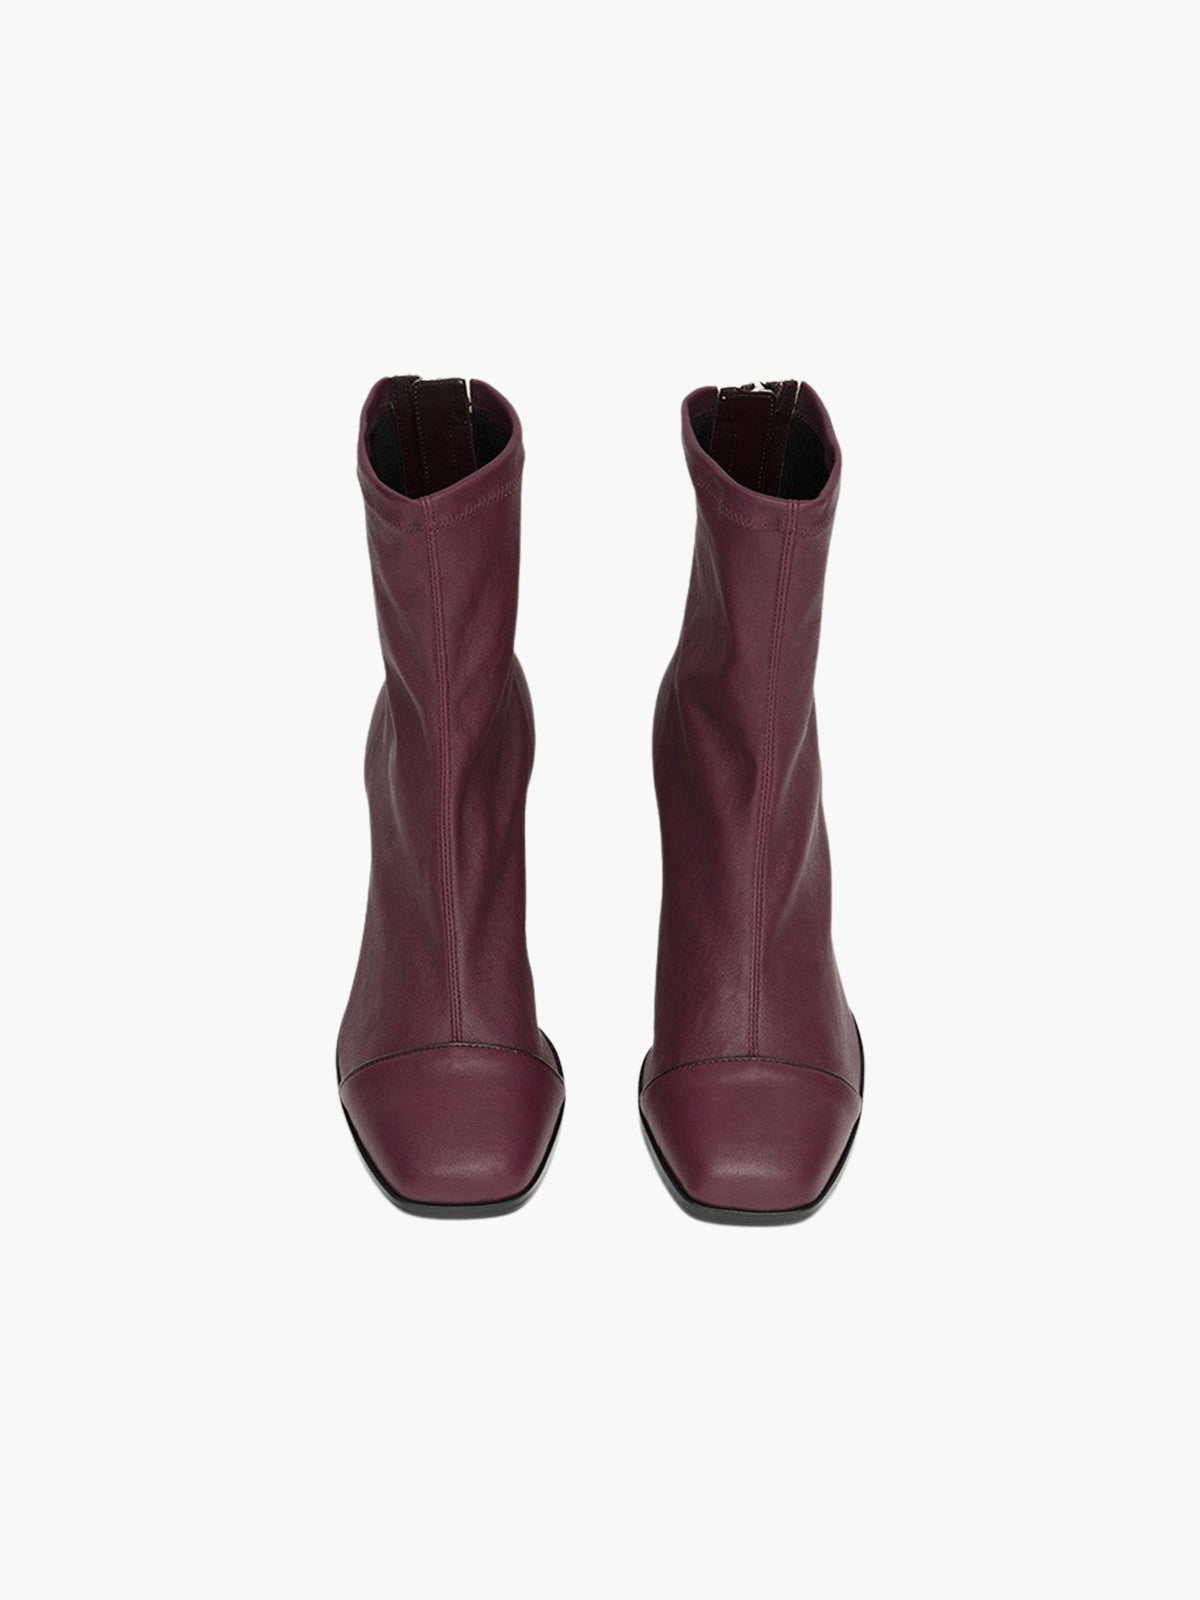 Aria Ankle Boots | Plum Stretch Nappa